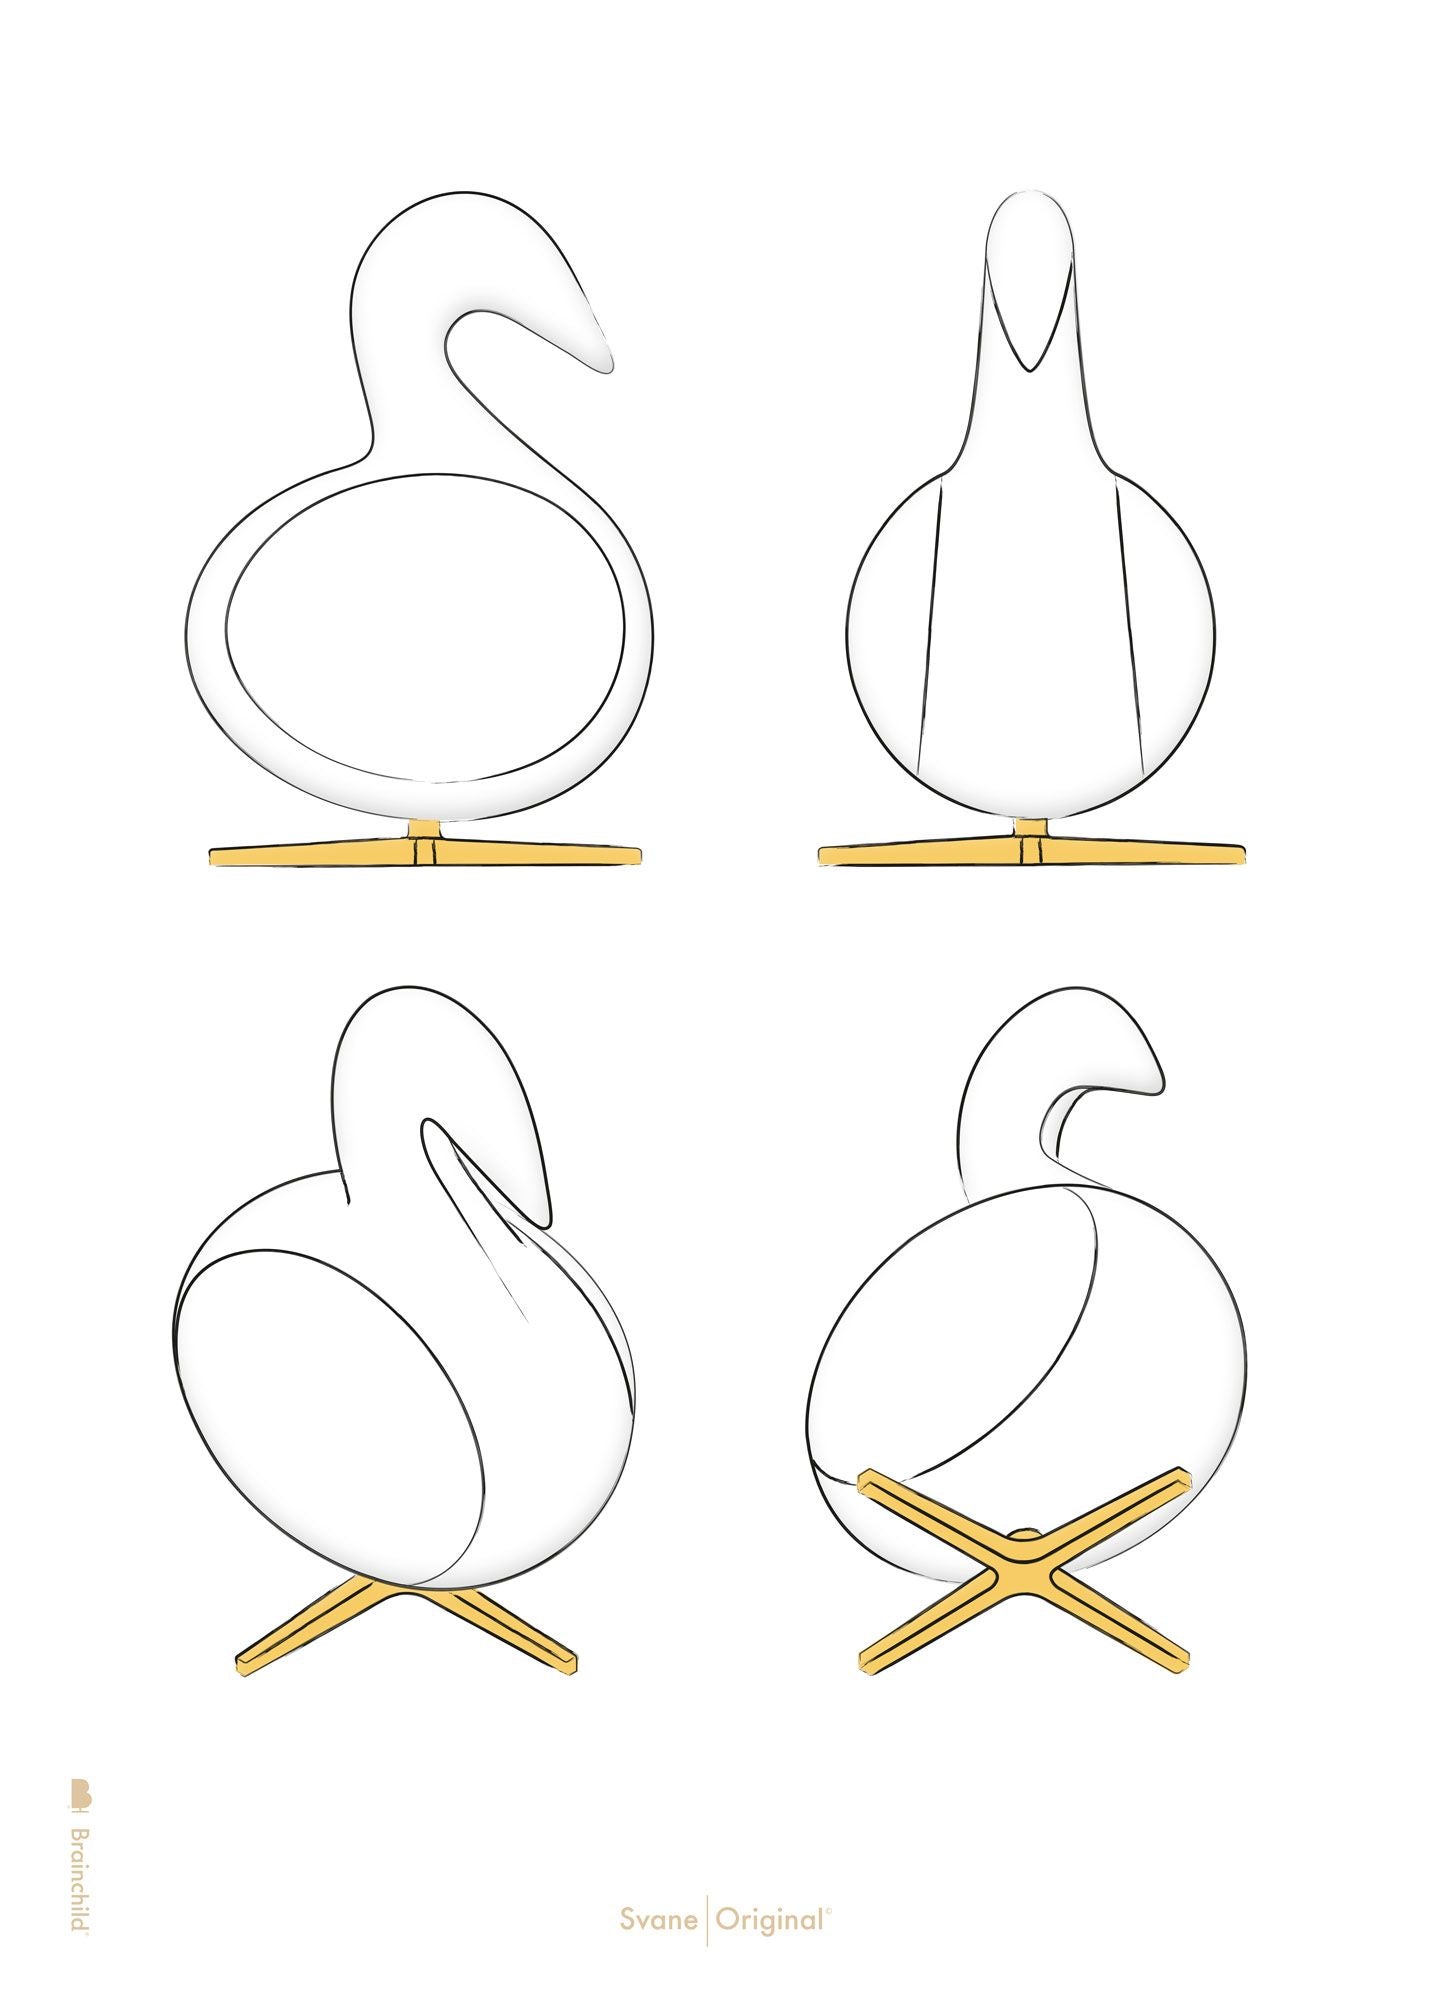 Brainchild Swan Design Sketches Poster Without Frame A5, White Background